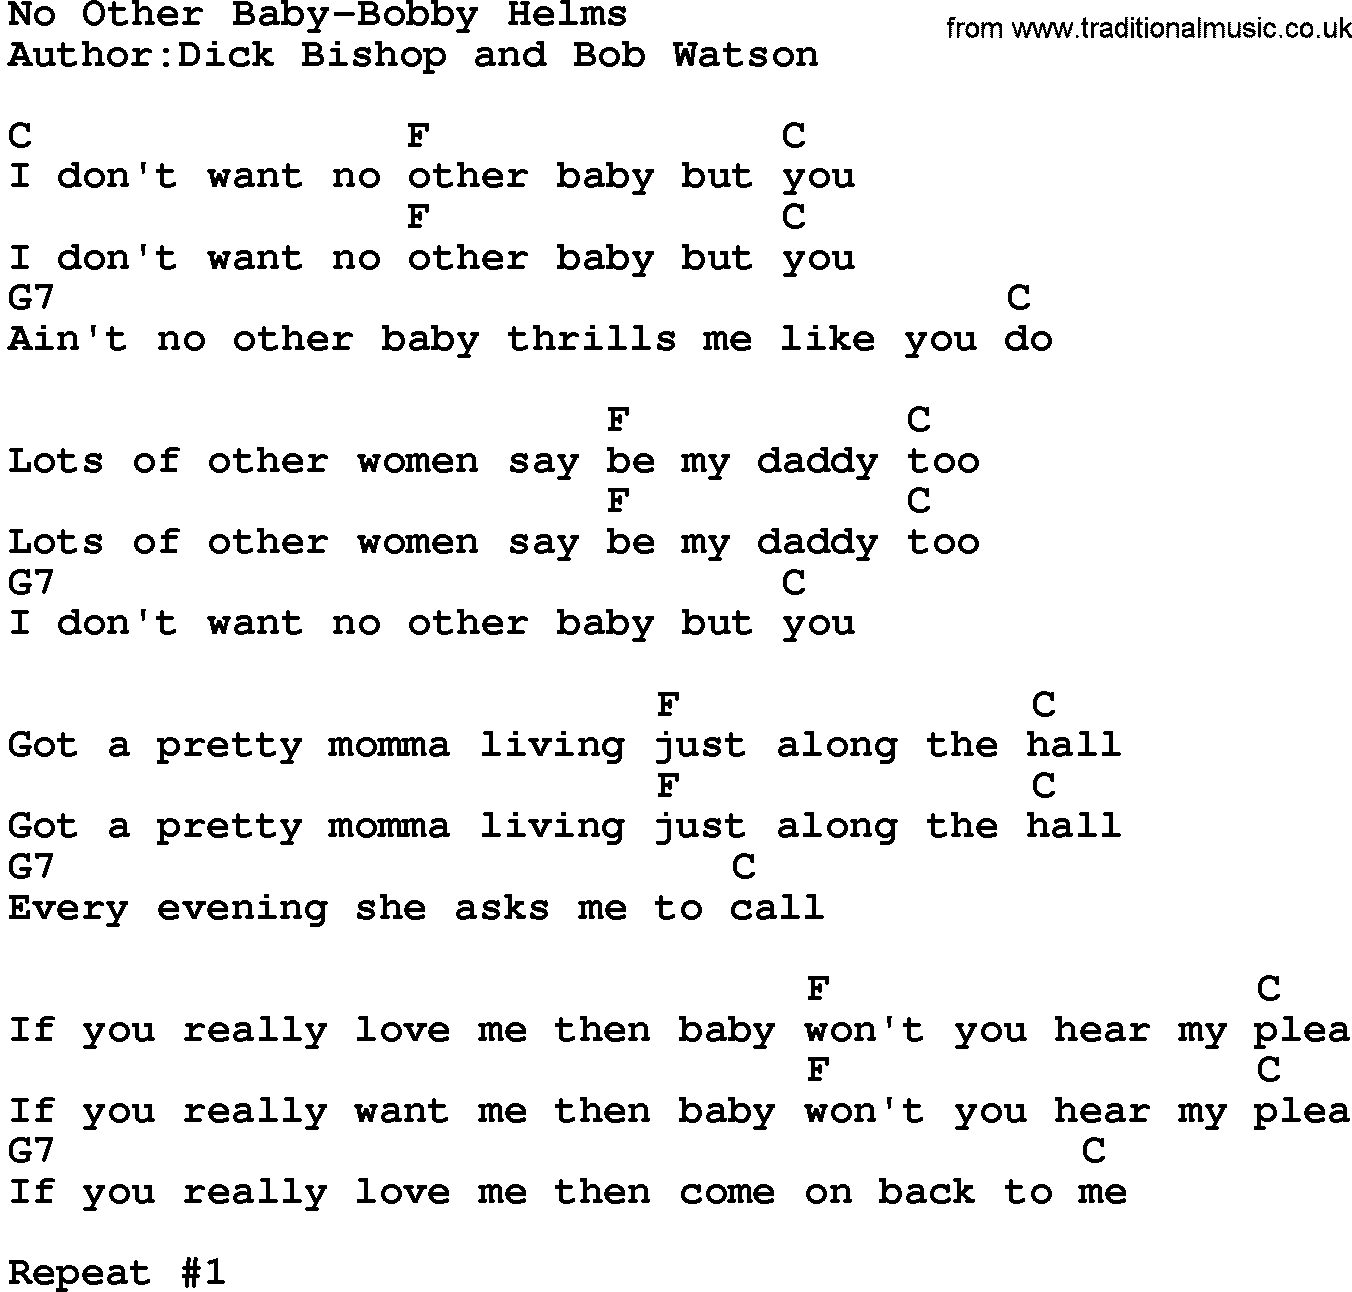 Country music song: No Other Baby-Bobby Helms lyrics and chords